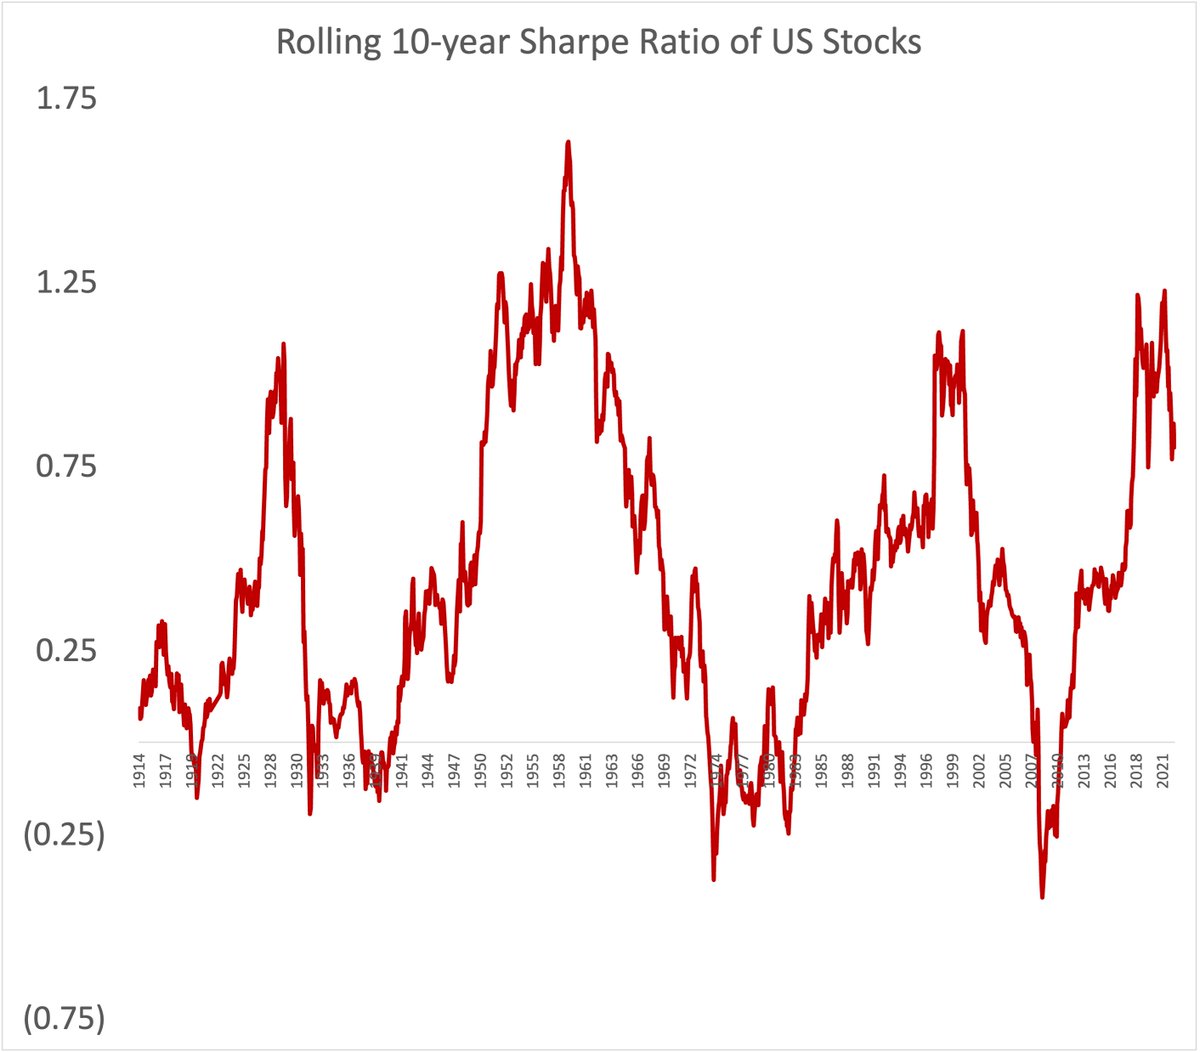 There have only been four times in history that US stocks have a rolling 10-year Sharpe ratio > 1.

Roaring Twenties
Nifty Fifties
Internet Bubble
*Late 2010s/Early 2020s/COVID/meme stonk/shitoin era